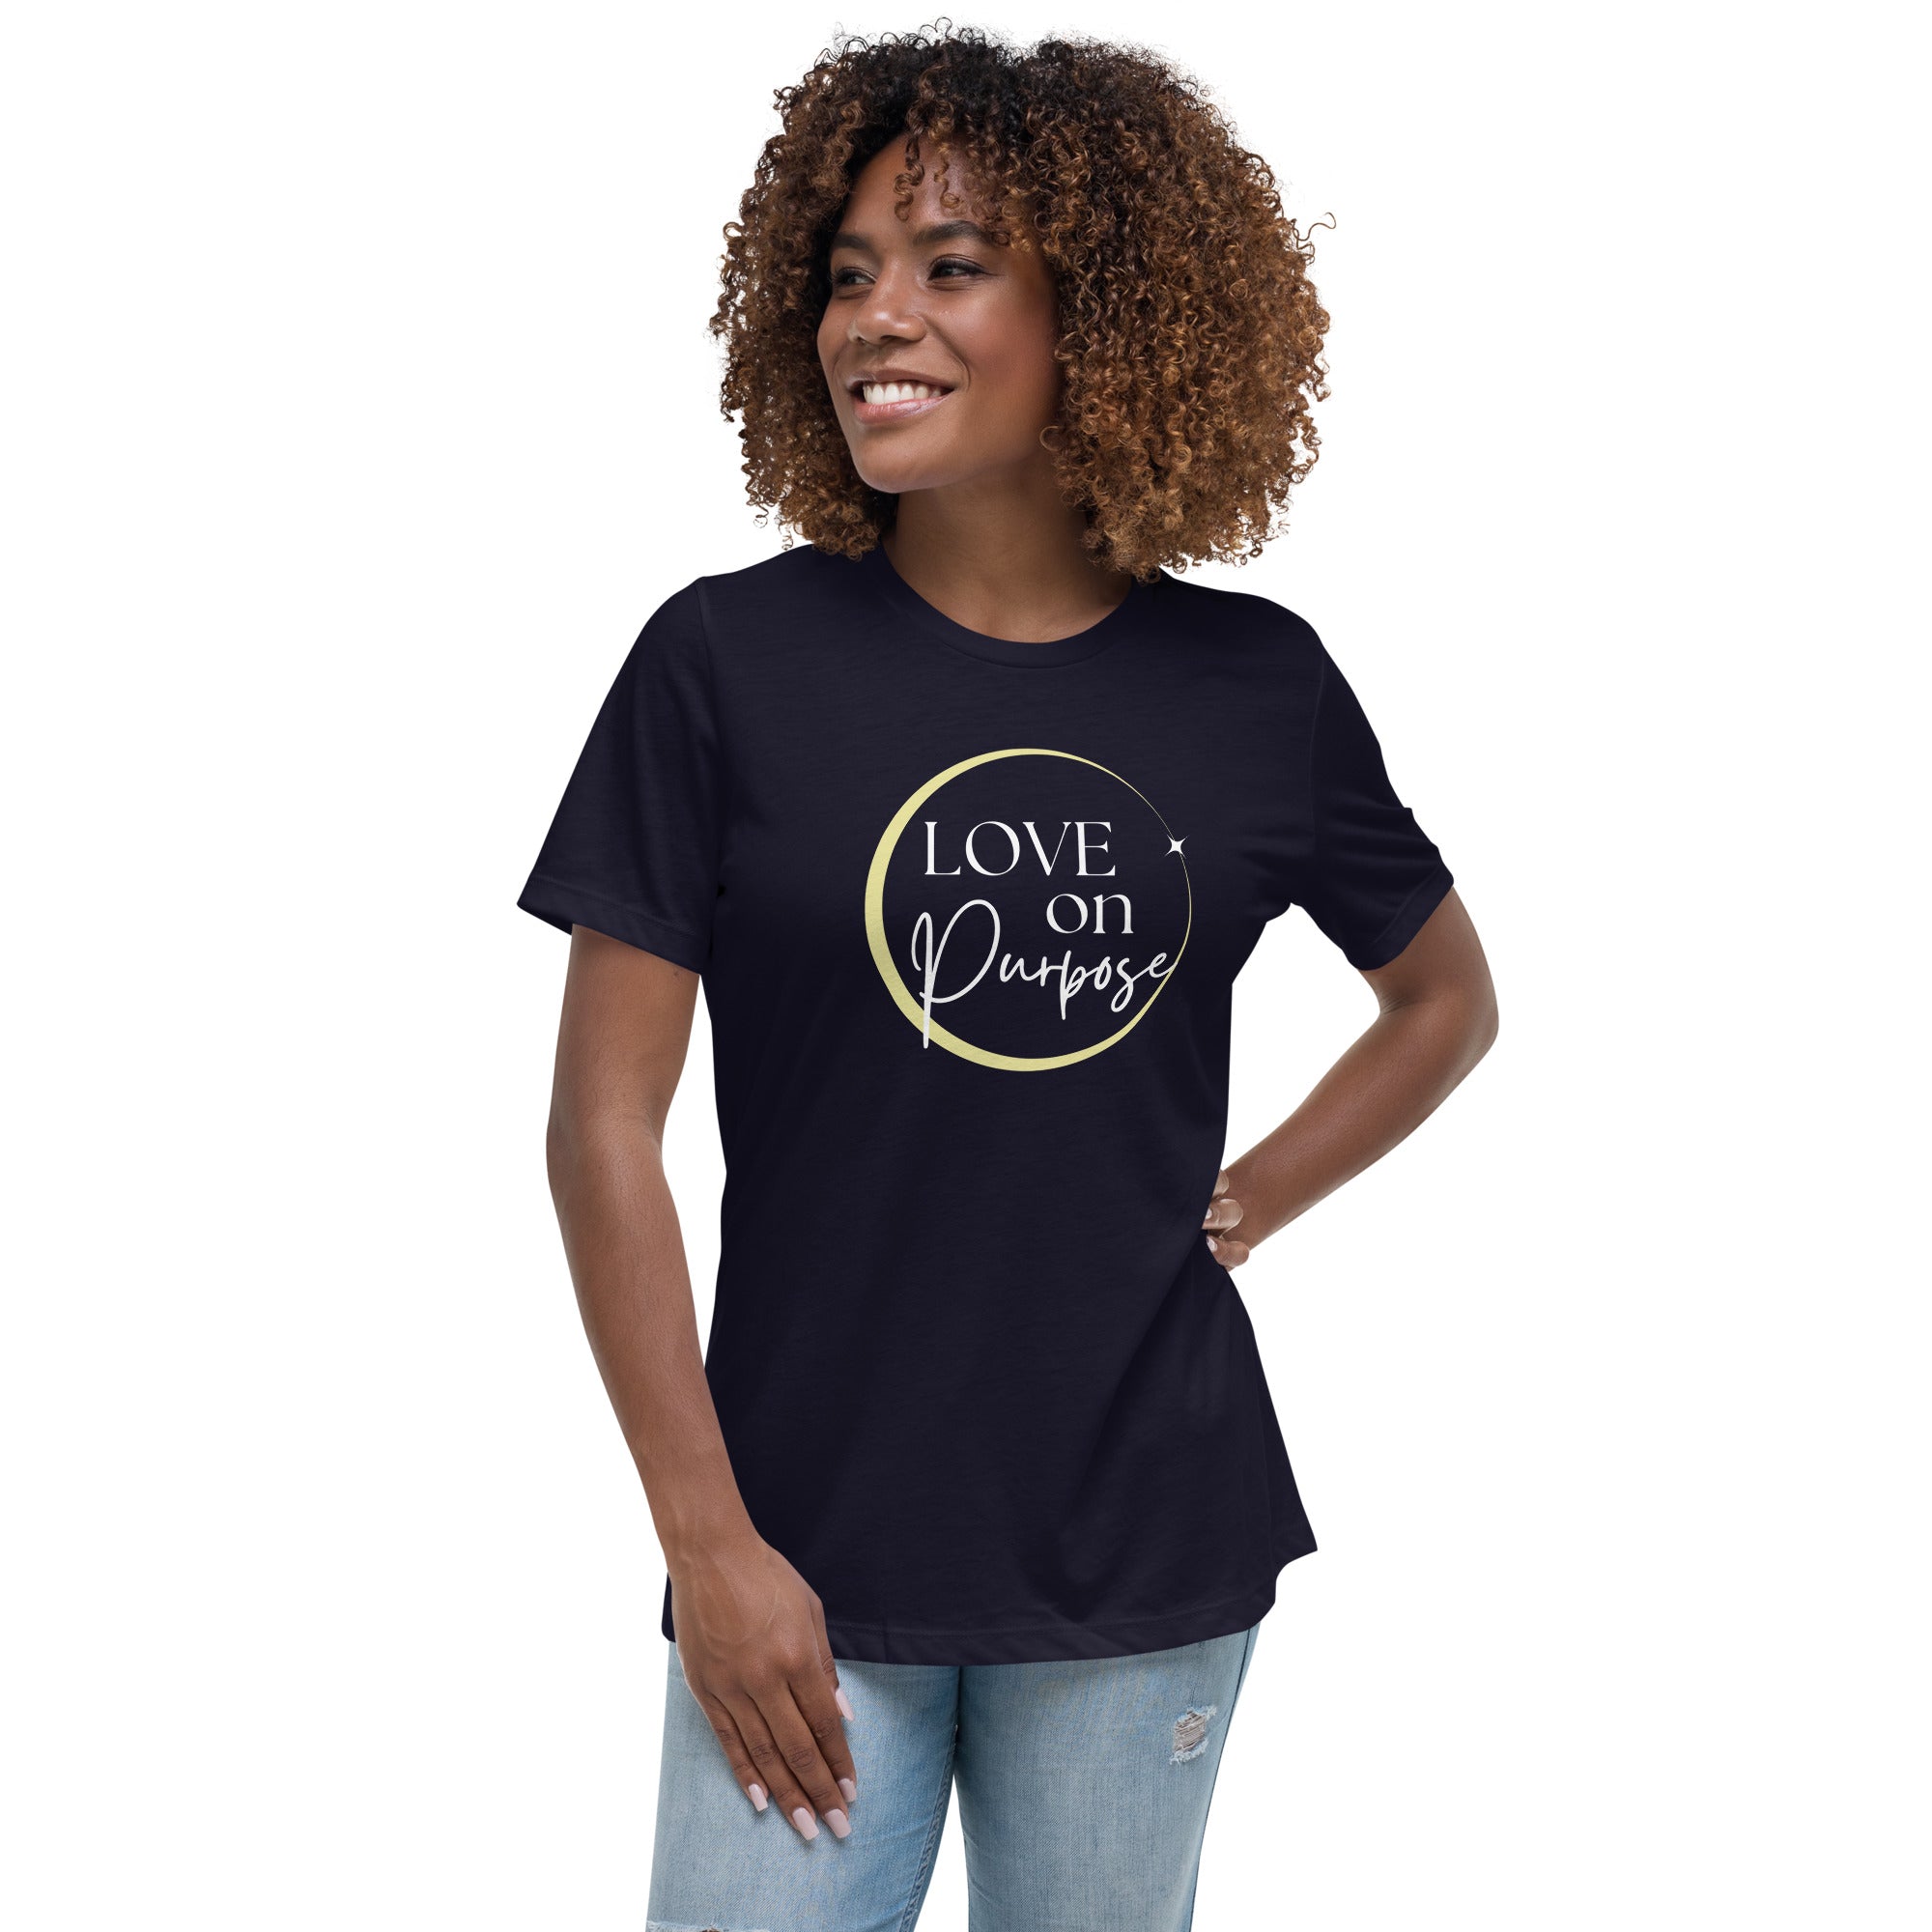 Love on Purpose - Women's Relaxed T-Shirt